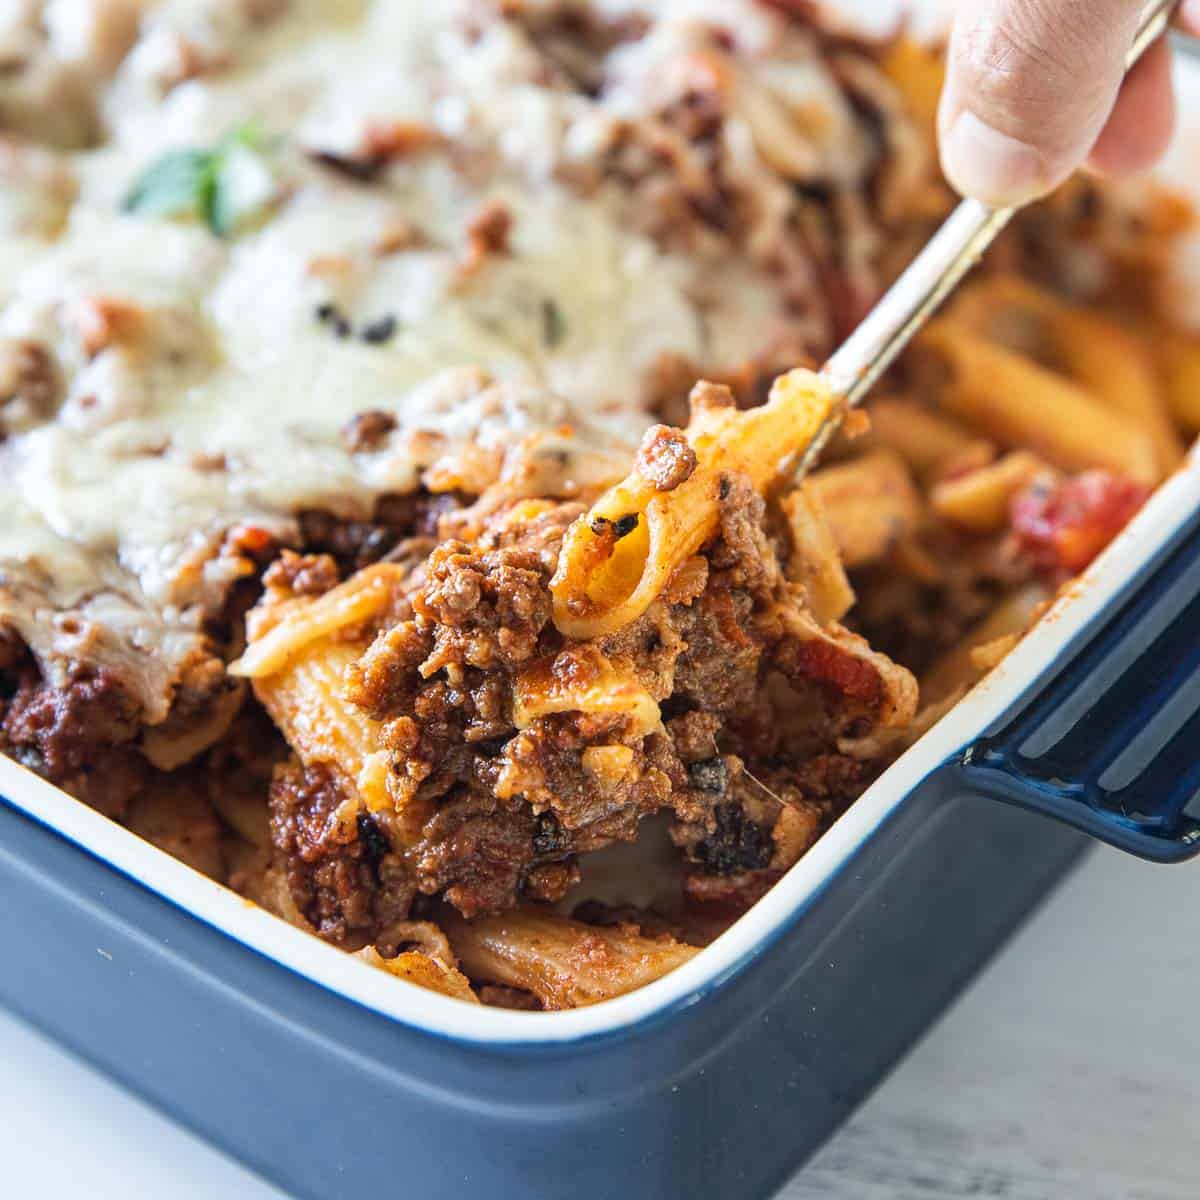 spoon scooping baked ziti with sausage